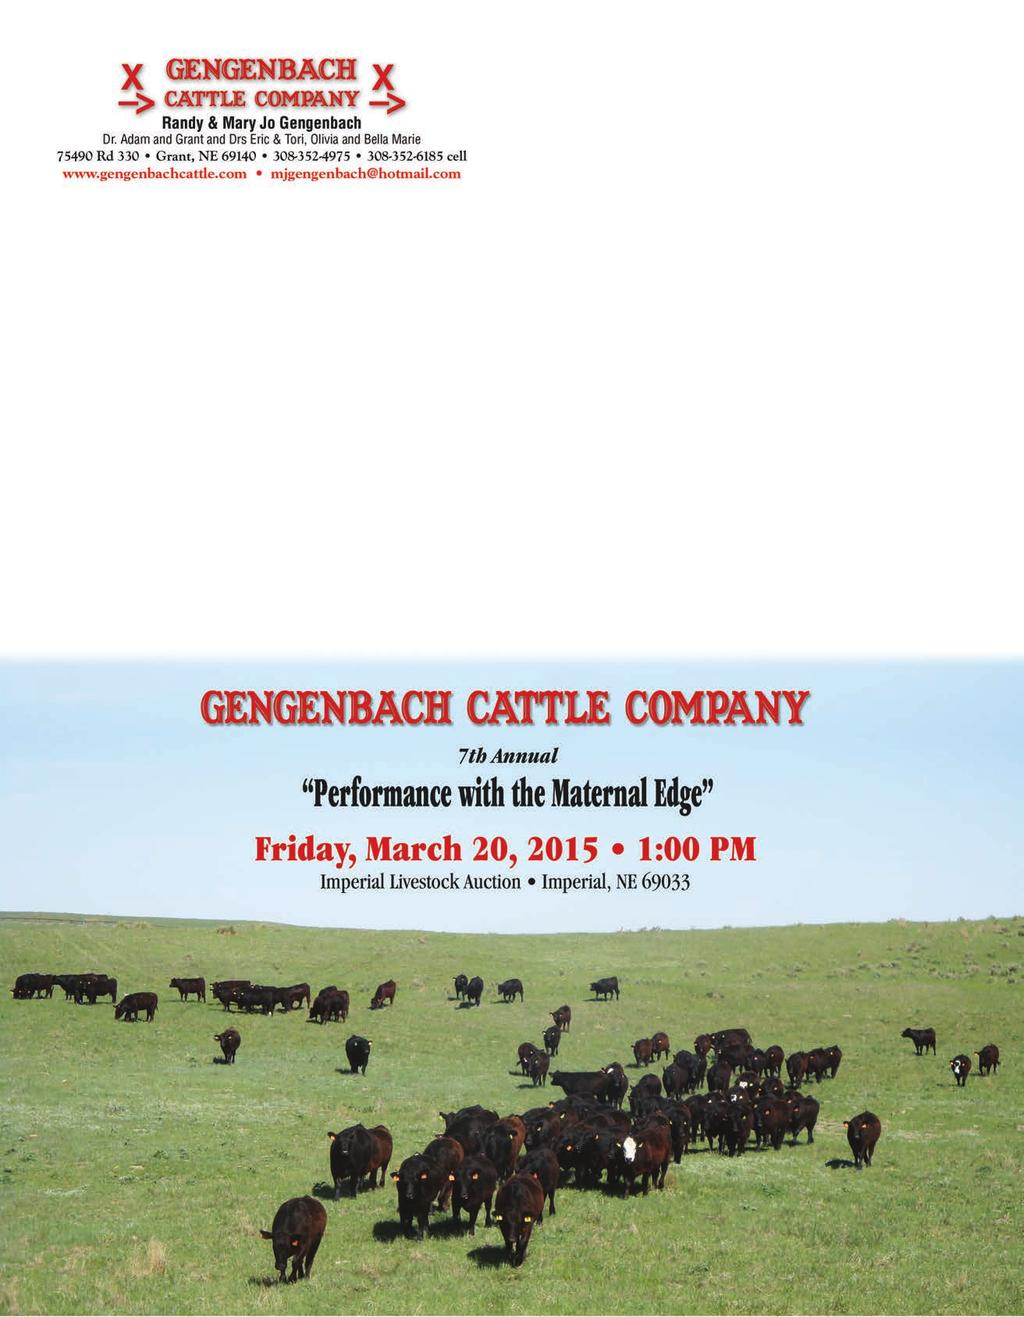 Created by: ASA PUBLICATION, INC 2 Simmental Way,